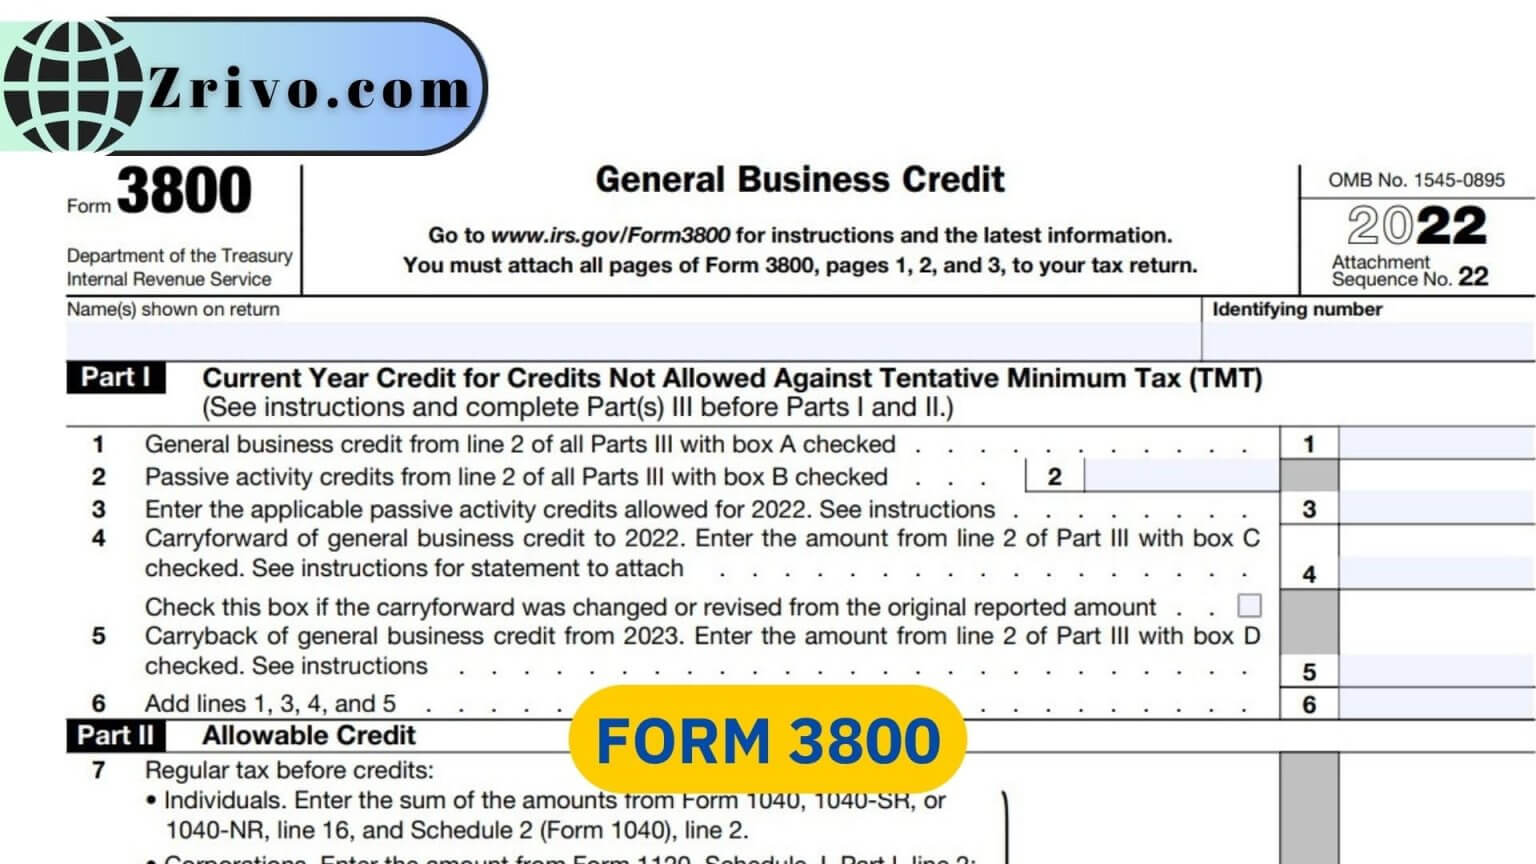 When Does The IRS Process Tax Returns? Form 1040